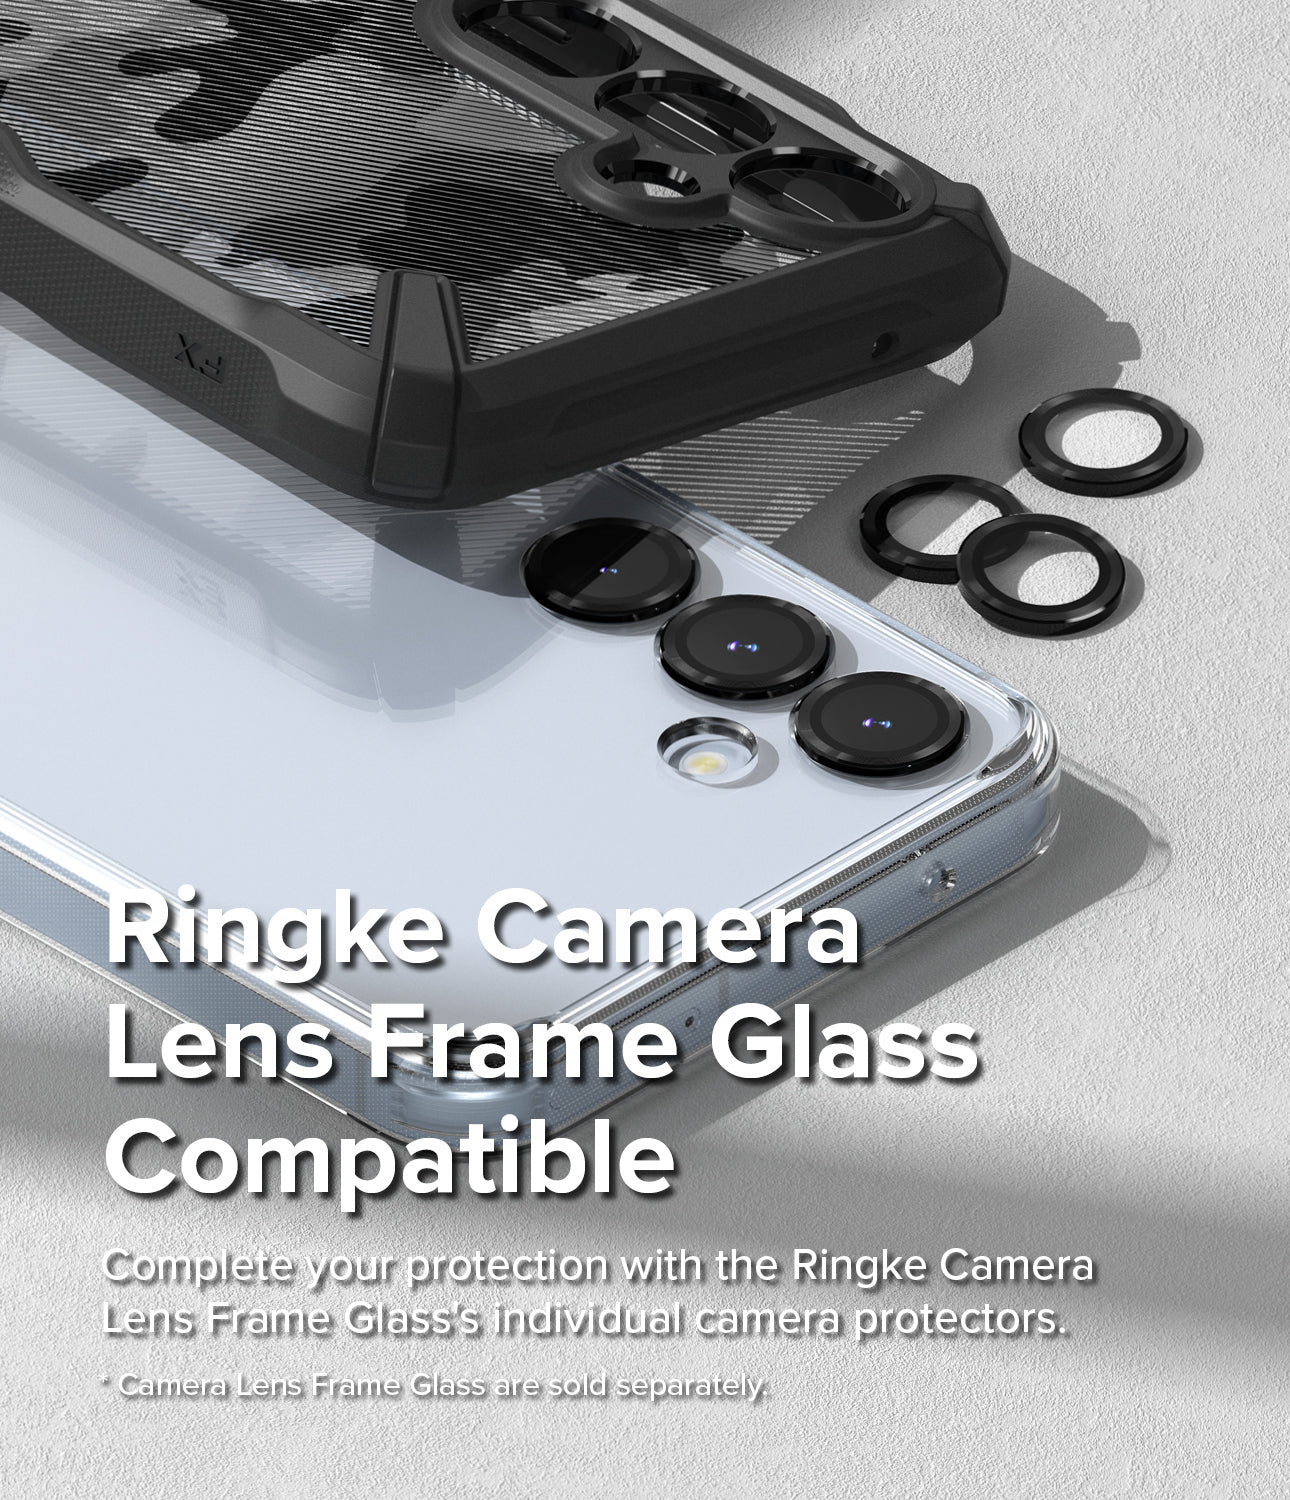 Galaxy A55 Case | Fusion Card - Ringke Camera Lens Frame Glass Compatible. Complete your protection with the Ringke Camera Lens Frame Glass' individual camera protectors